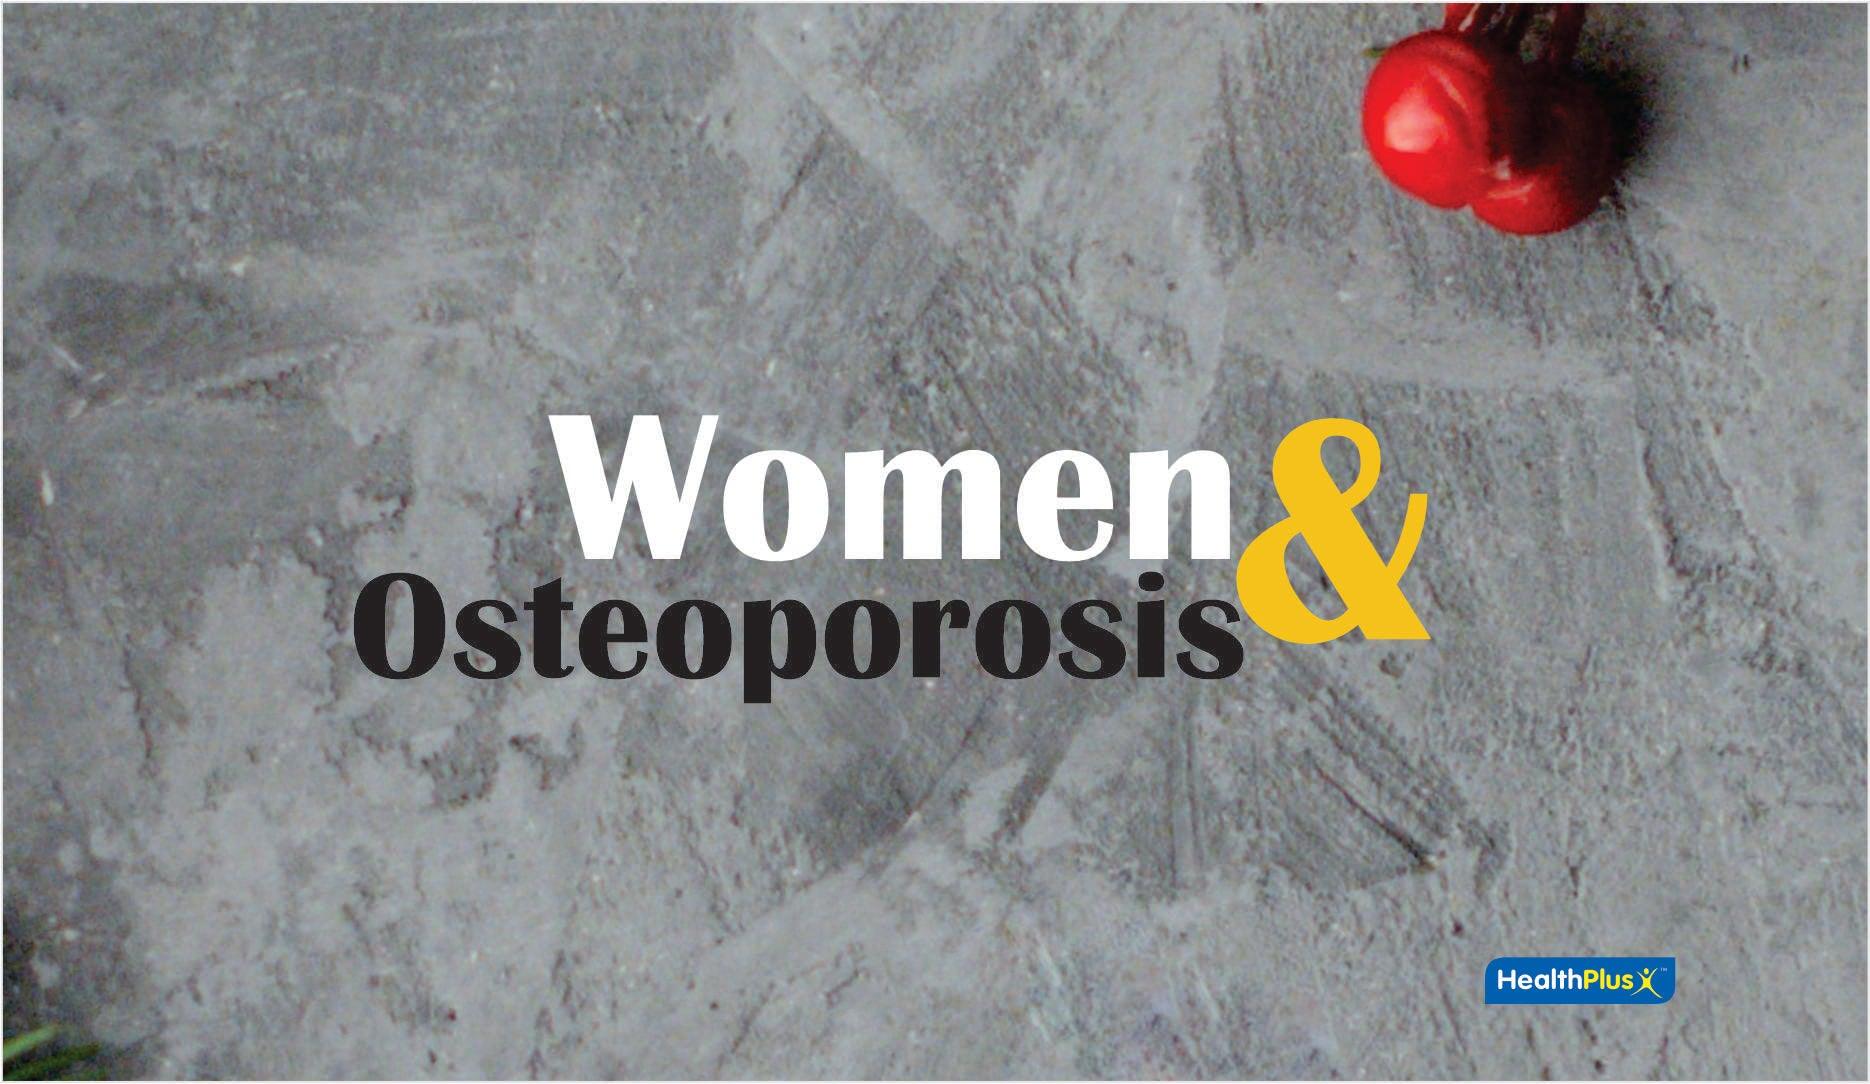 What to know about Women & Osteoporosis - HealthPlus